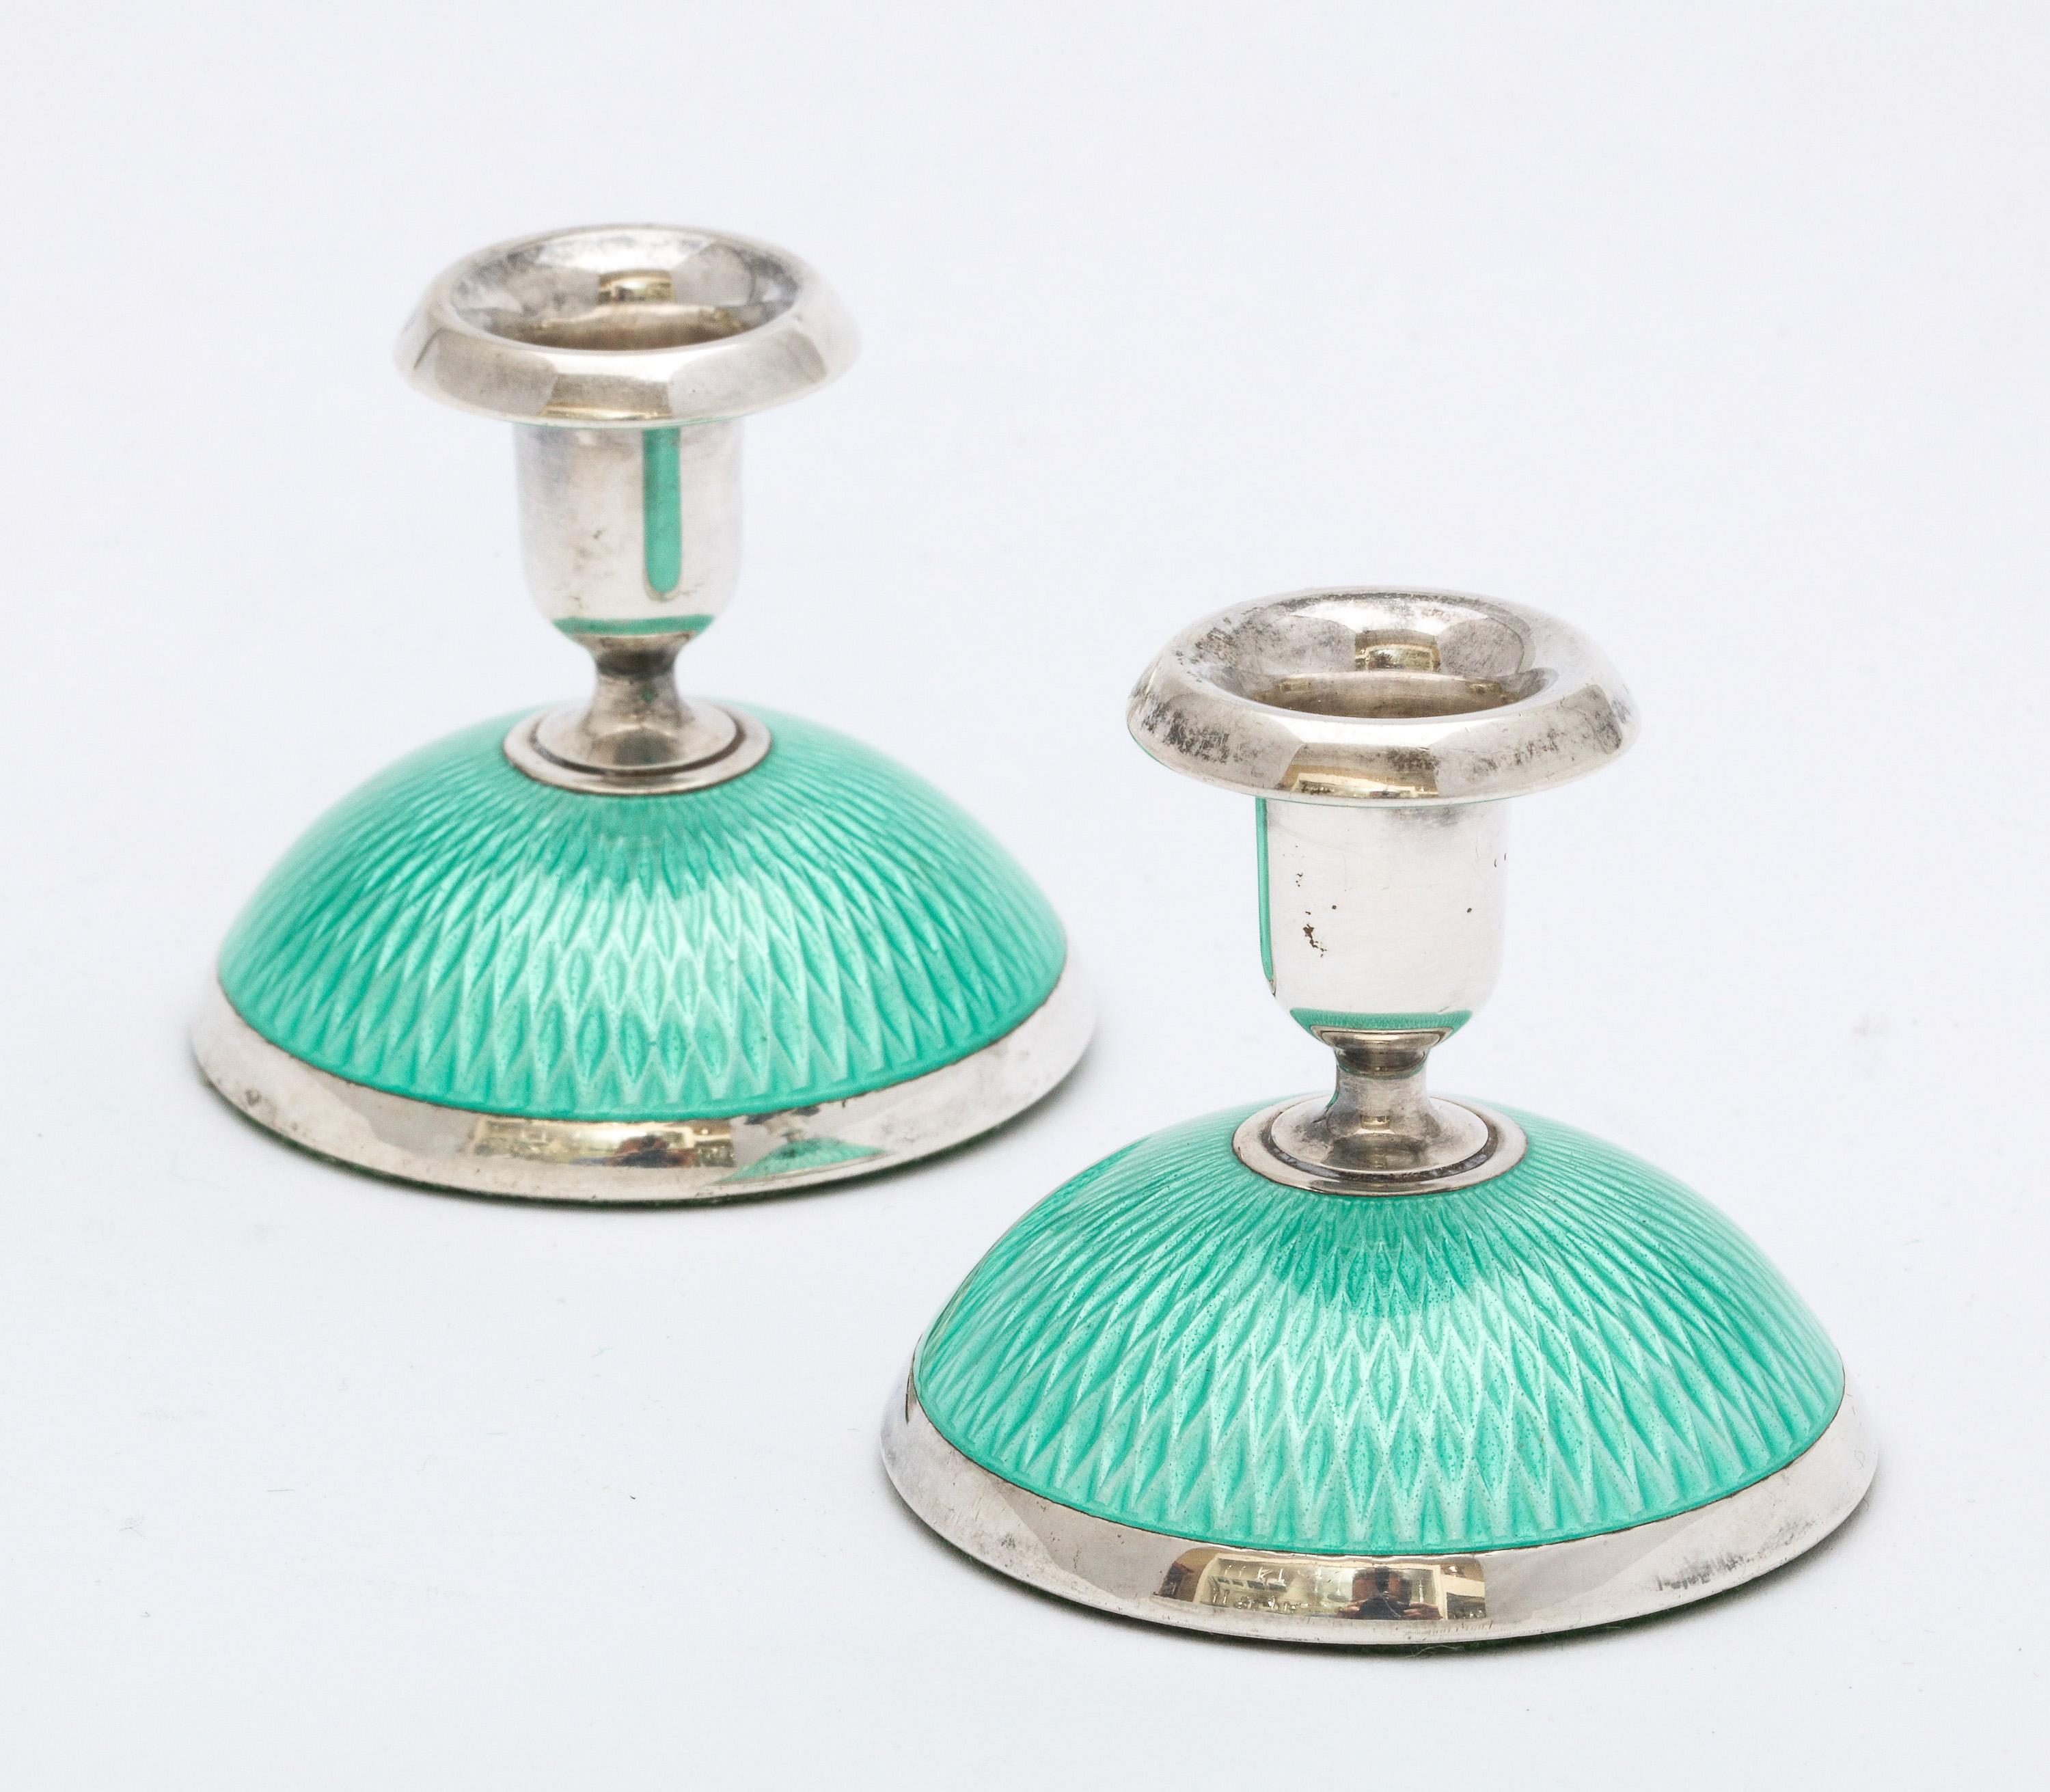 Pair of Art Deco, sterling silver and turquoise guilloche enamel candlesticks, Oslo, Norway, Ca. 1930's, 
Norsk Solwarreindustri - makers. Each candlestick measures 2 inches high x 2 inches diameter (across base). Underside of each candlestick is